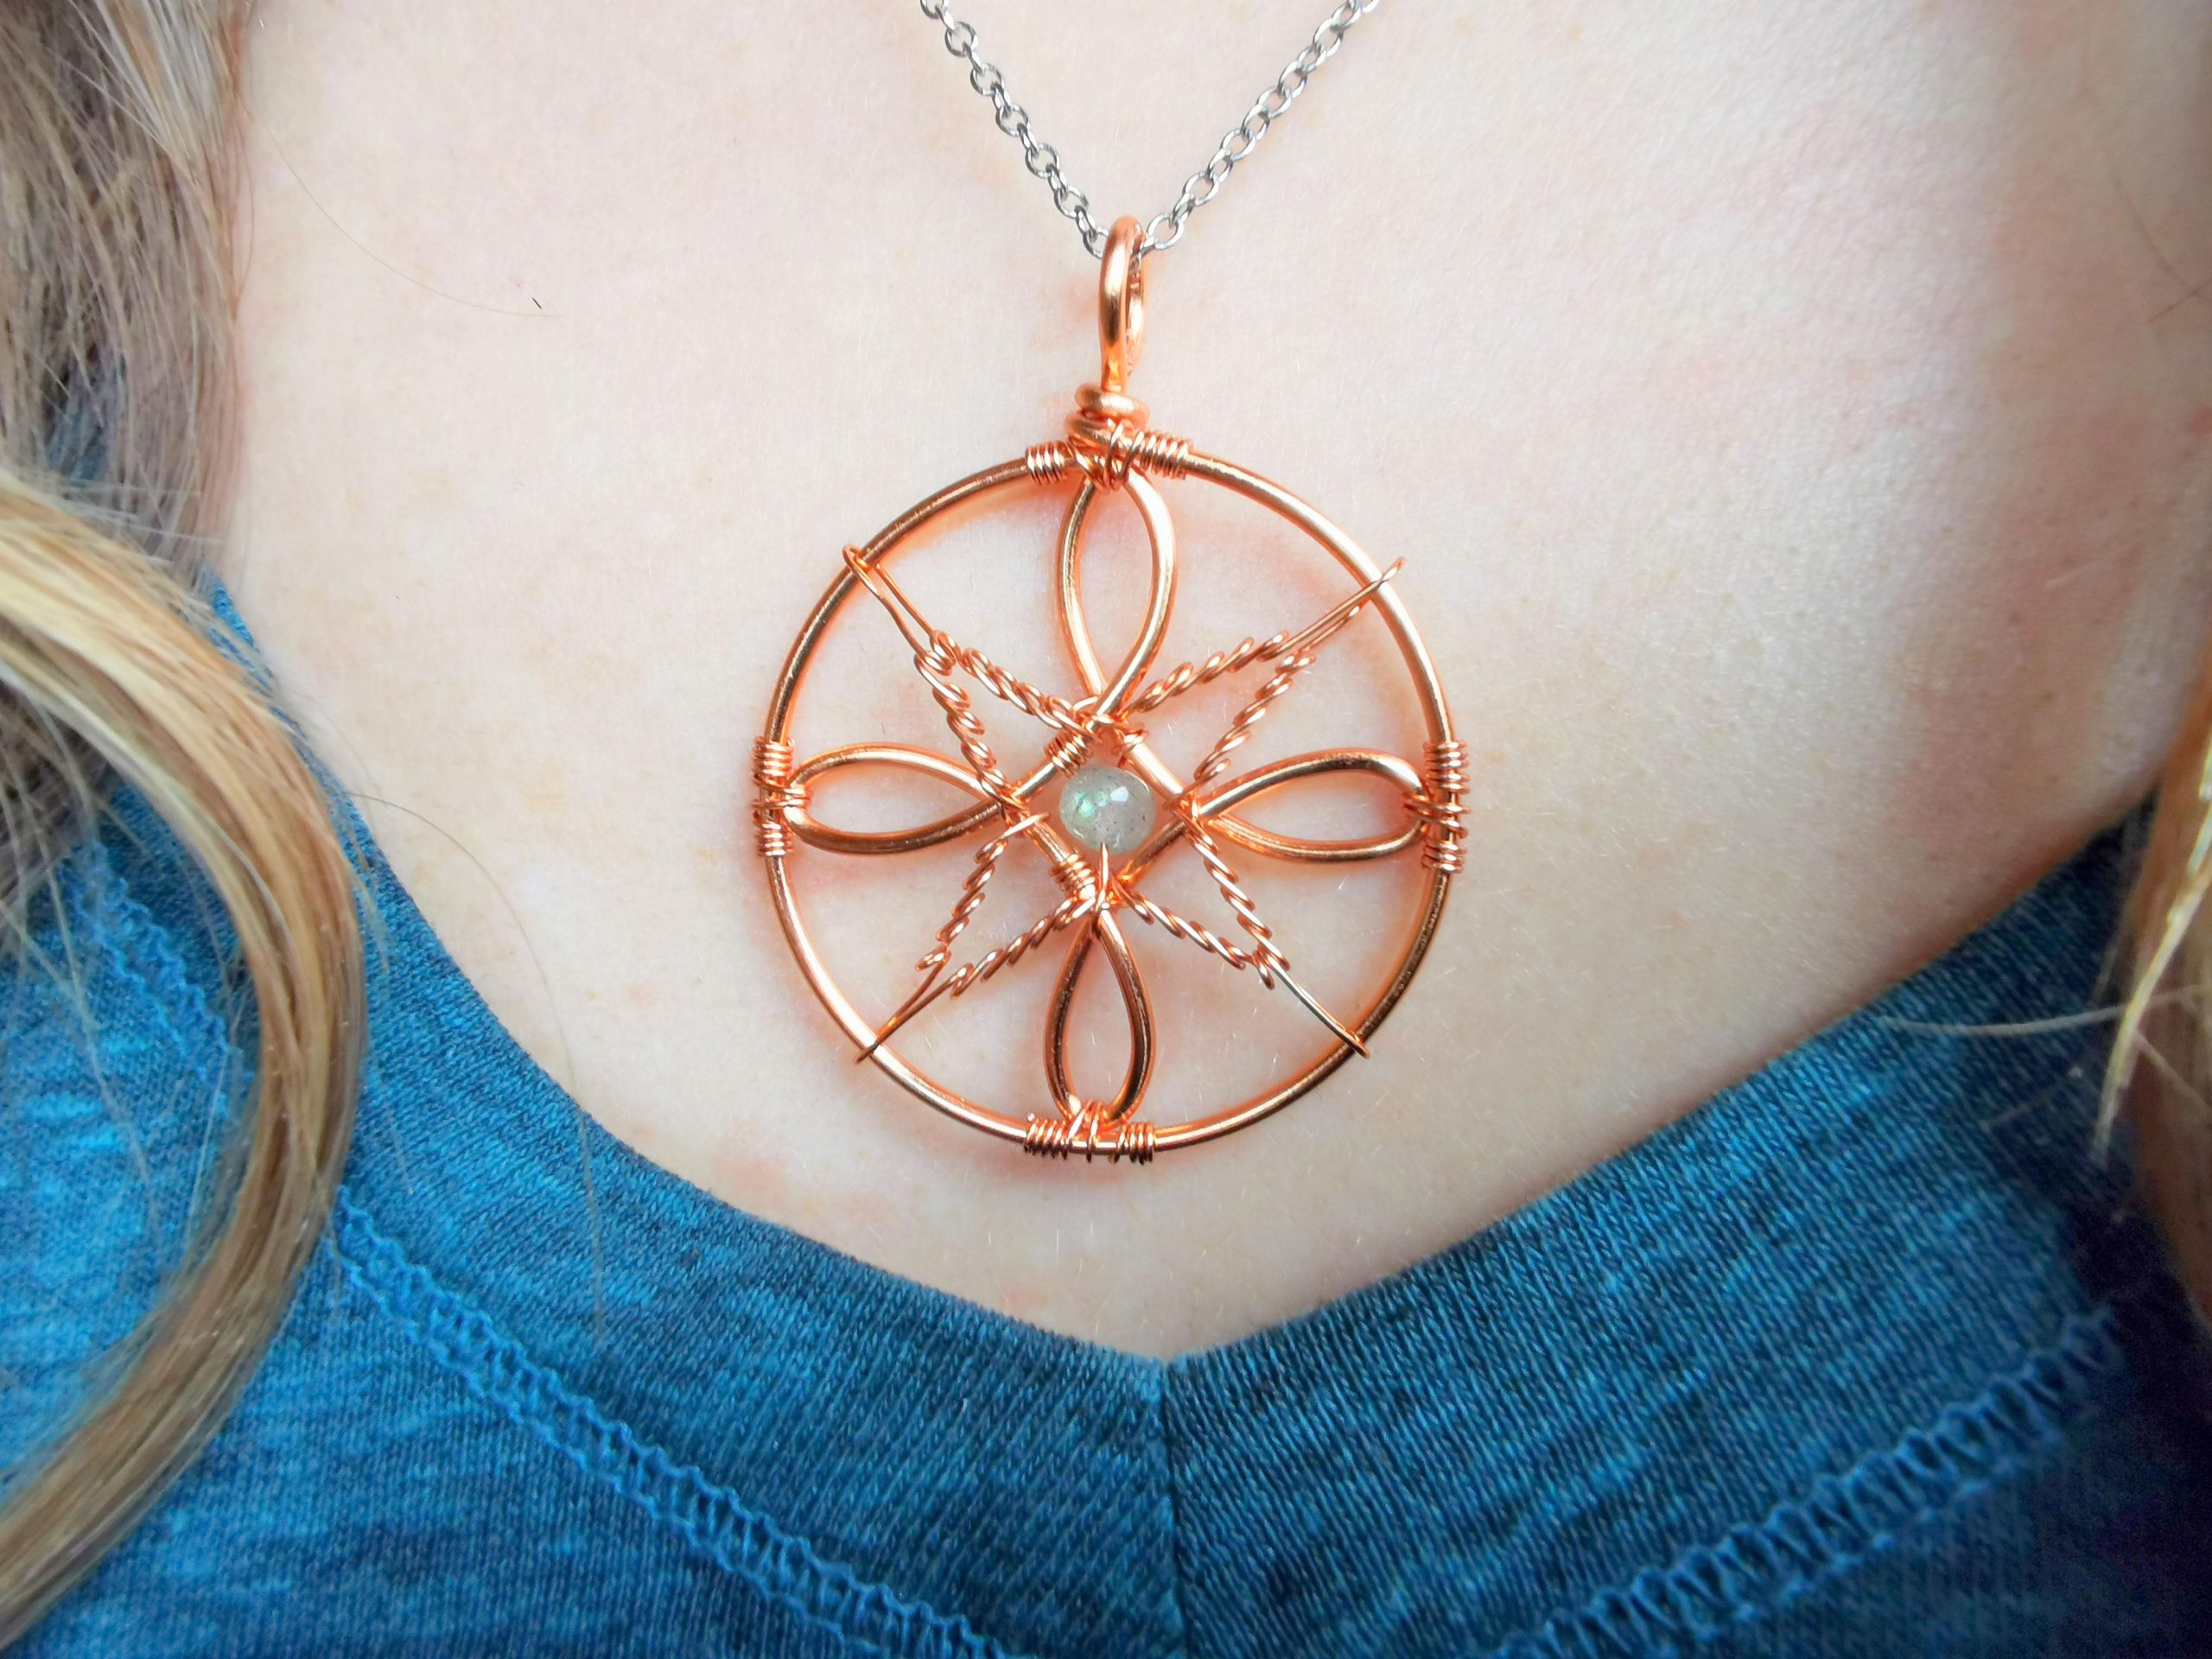 I crafted a superstar pendant with copper wire.